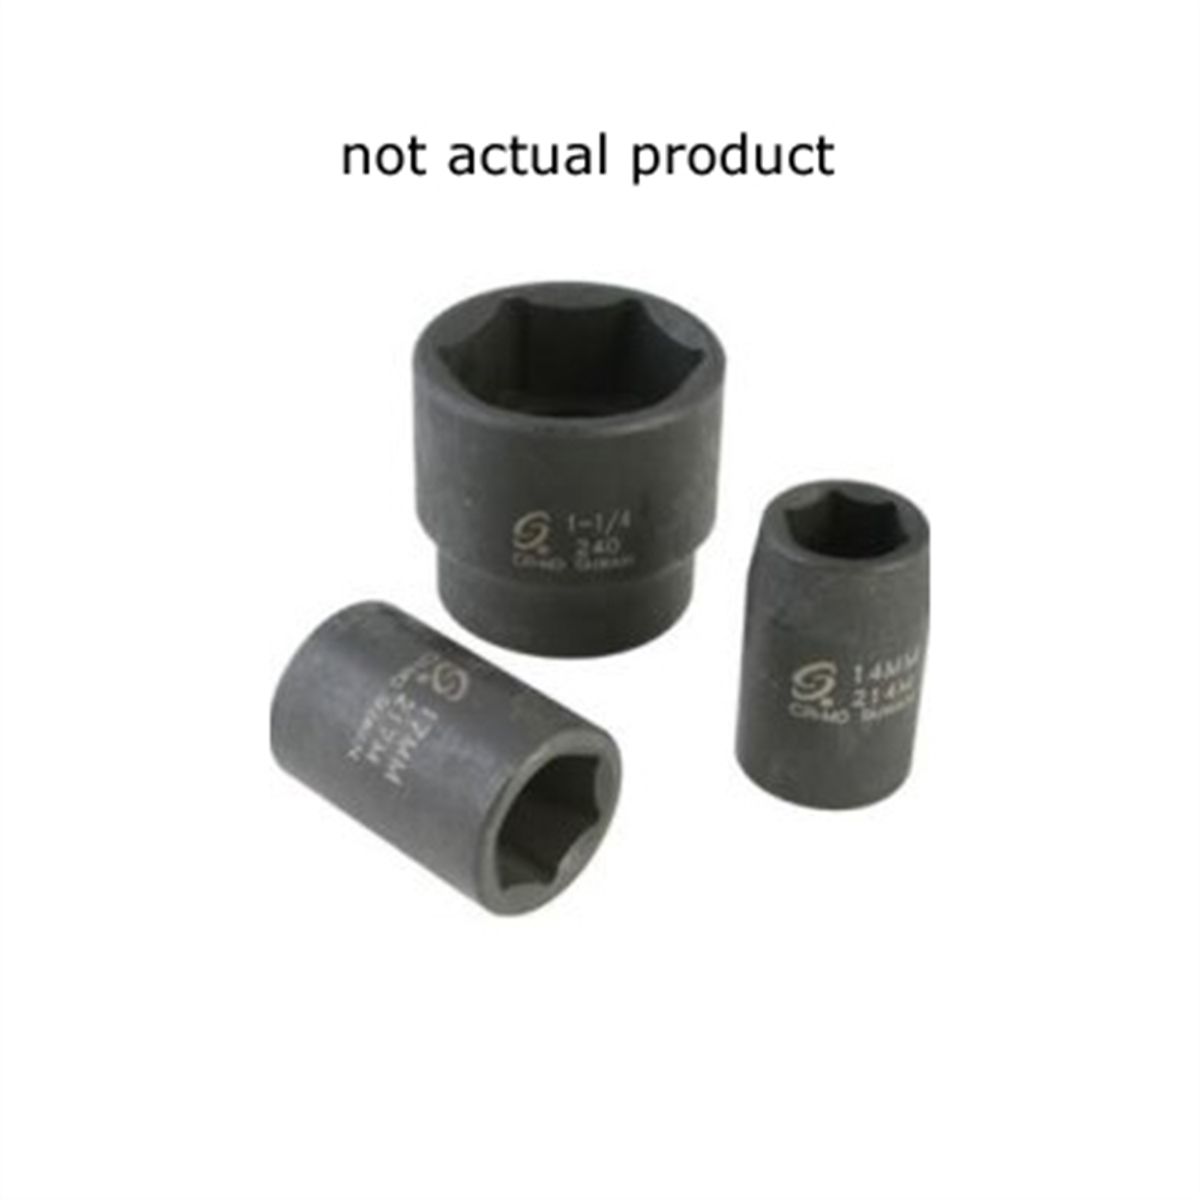 1/2" Drive x 12mm, Extra Deep, 12 Point